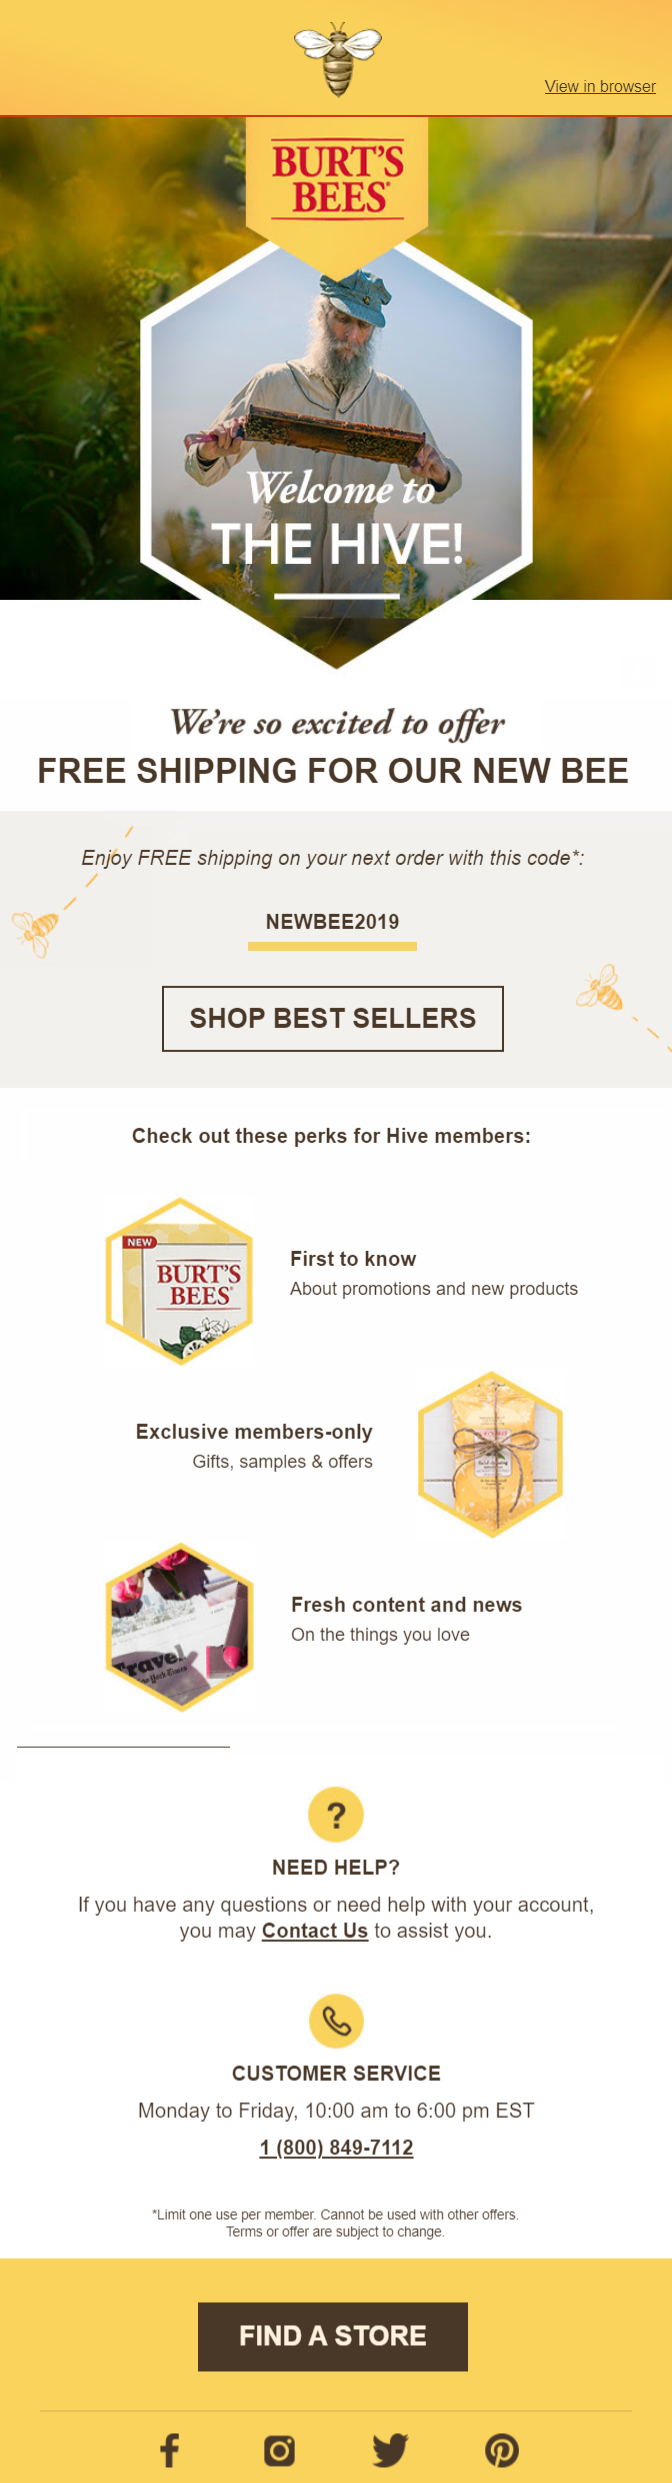 burt's bees campaign for welcoming subscribers